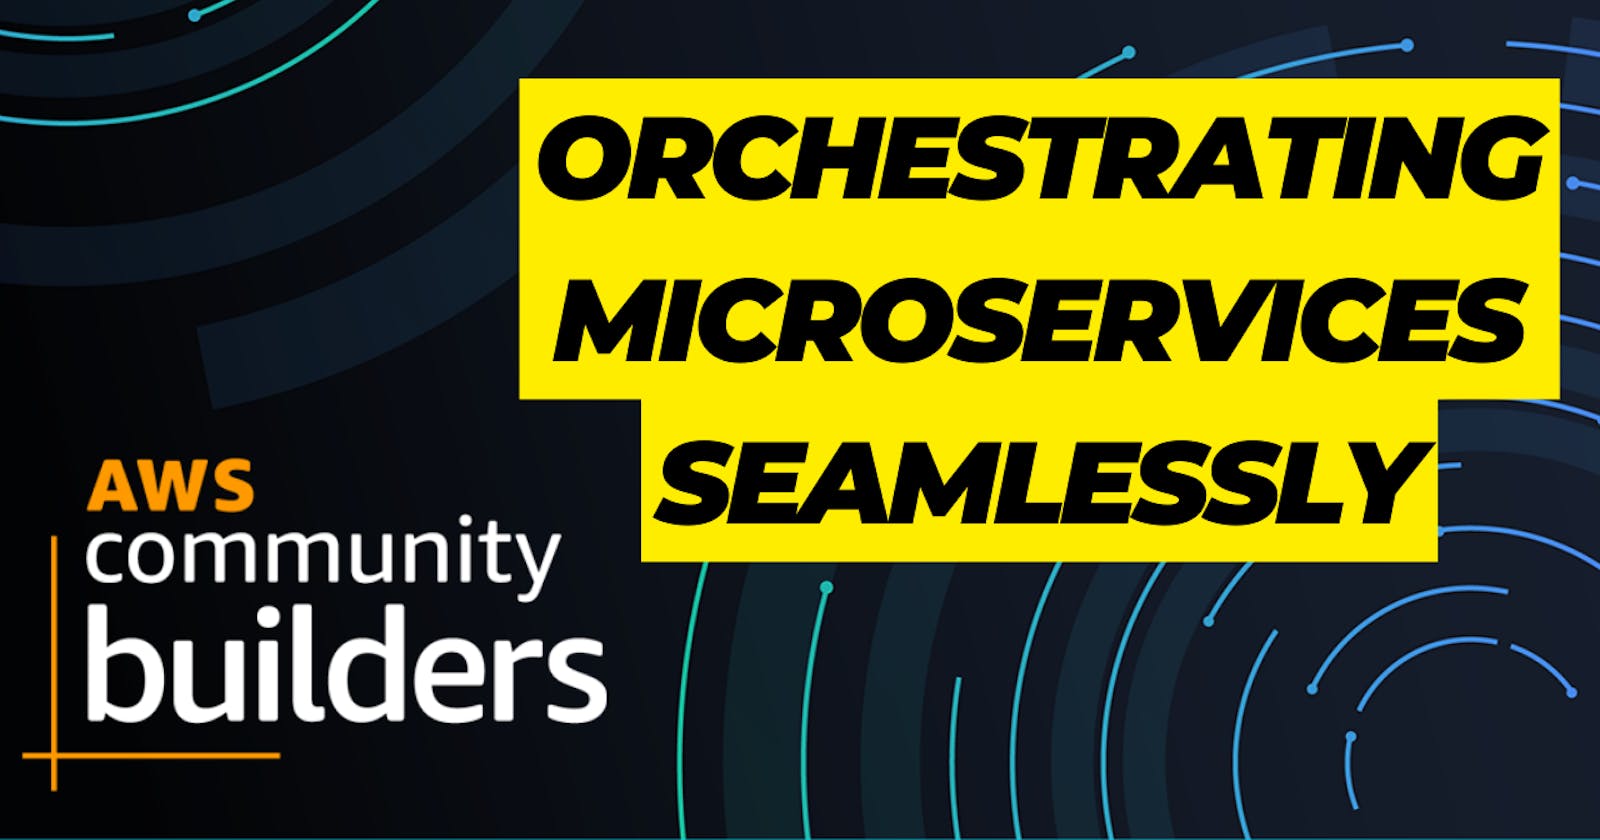 AWS Step Functions: Orchestrating Microservices Seamlessly